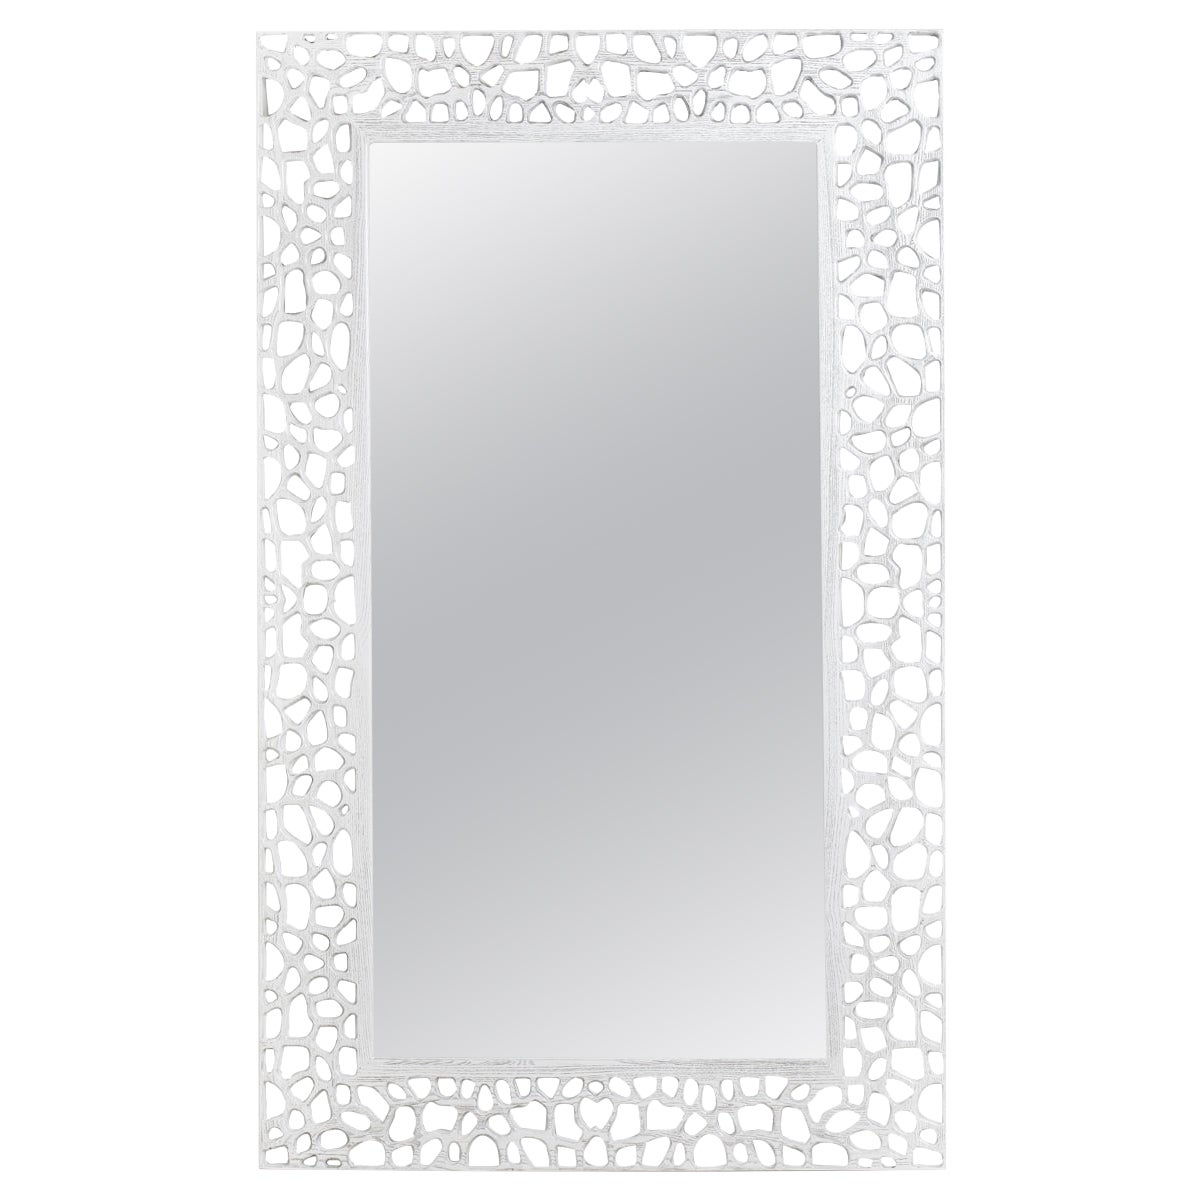 (Final Payment Listing) Angola White Ash Solid Wood Mirror